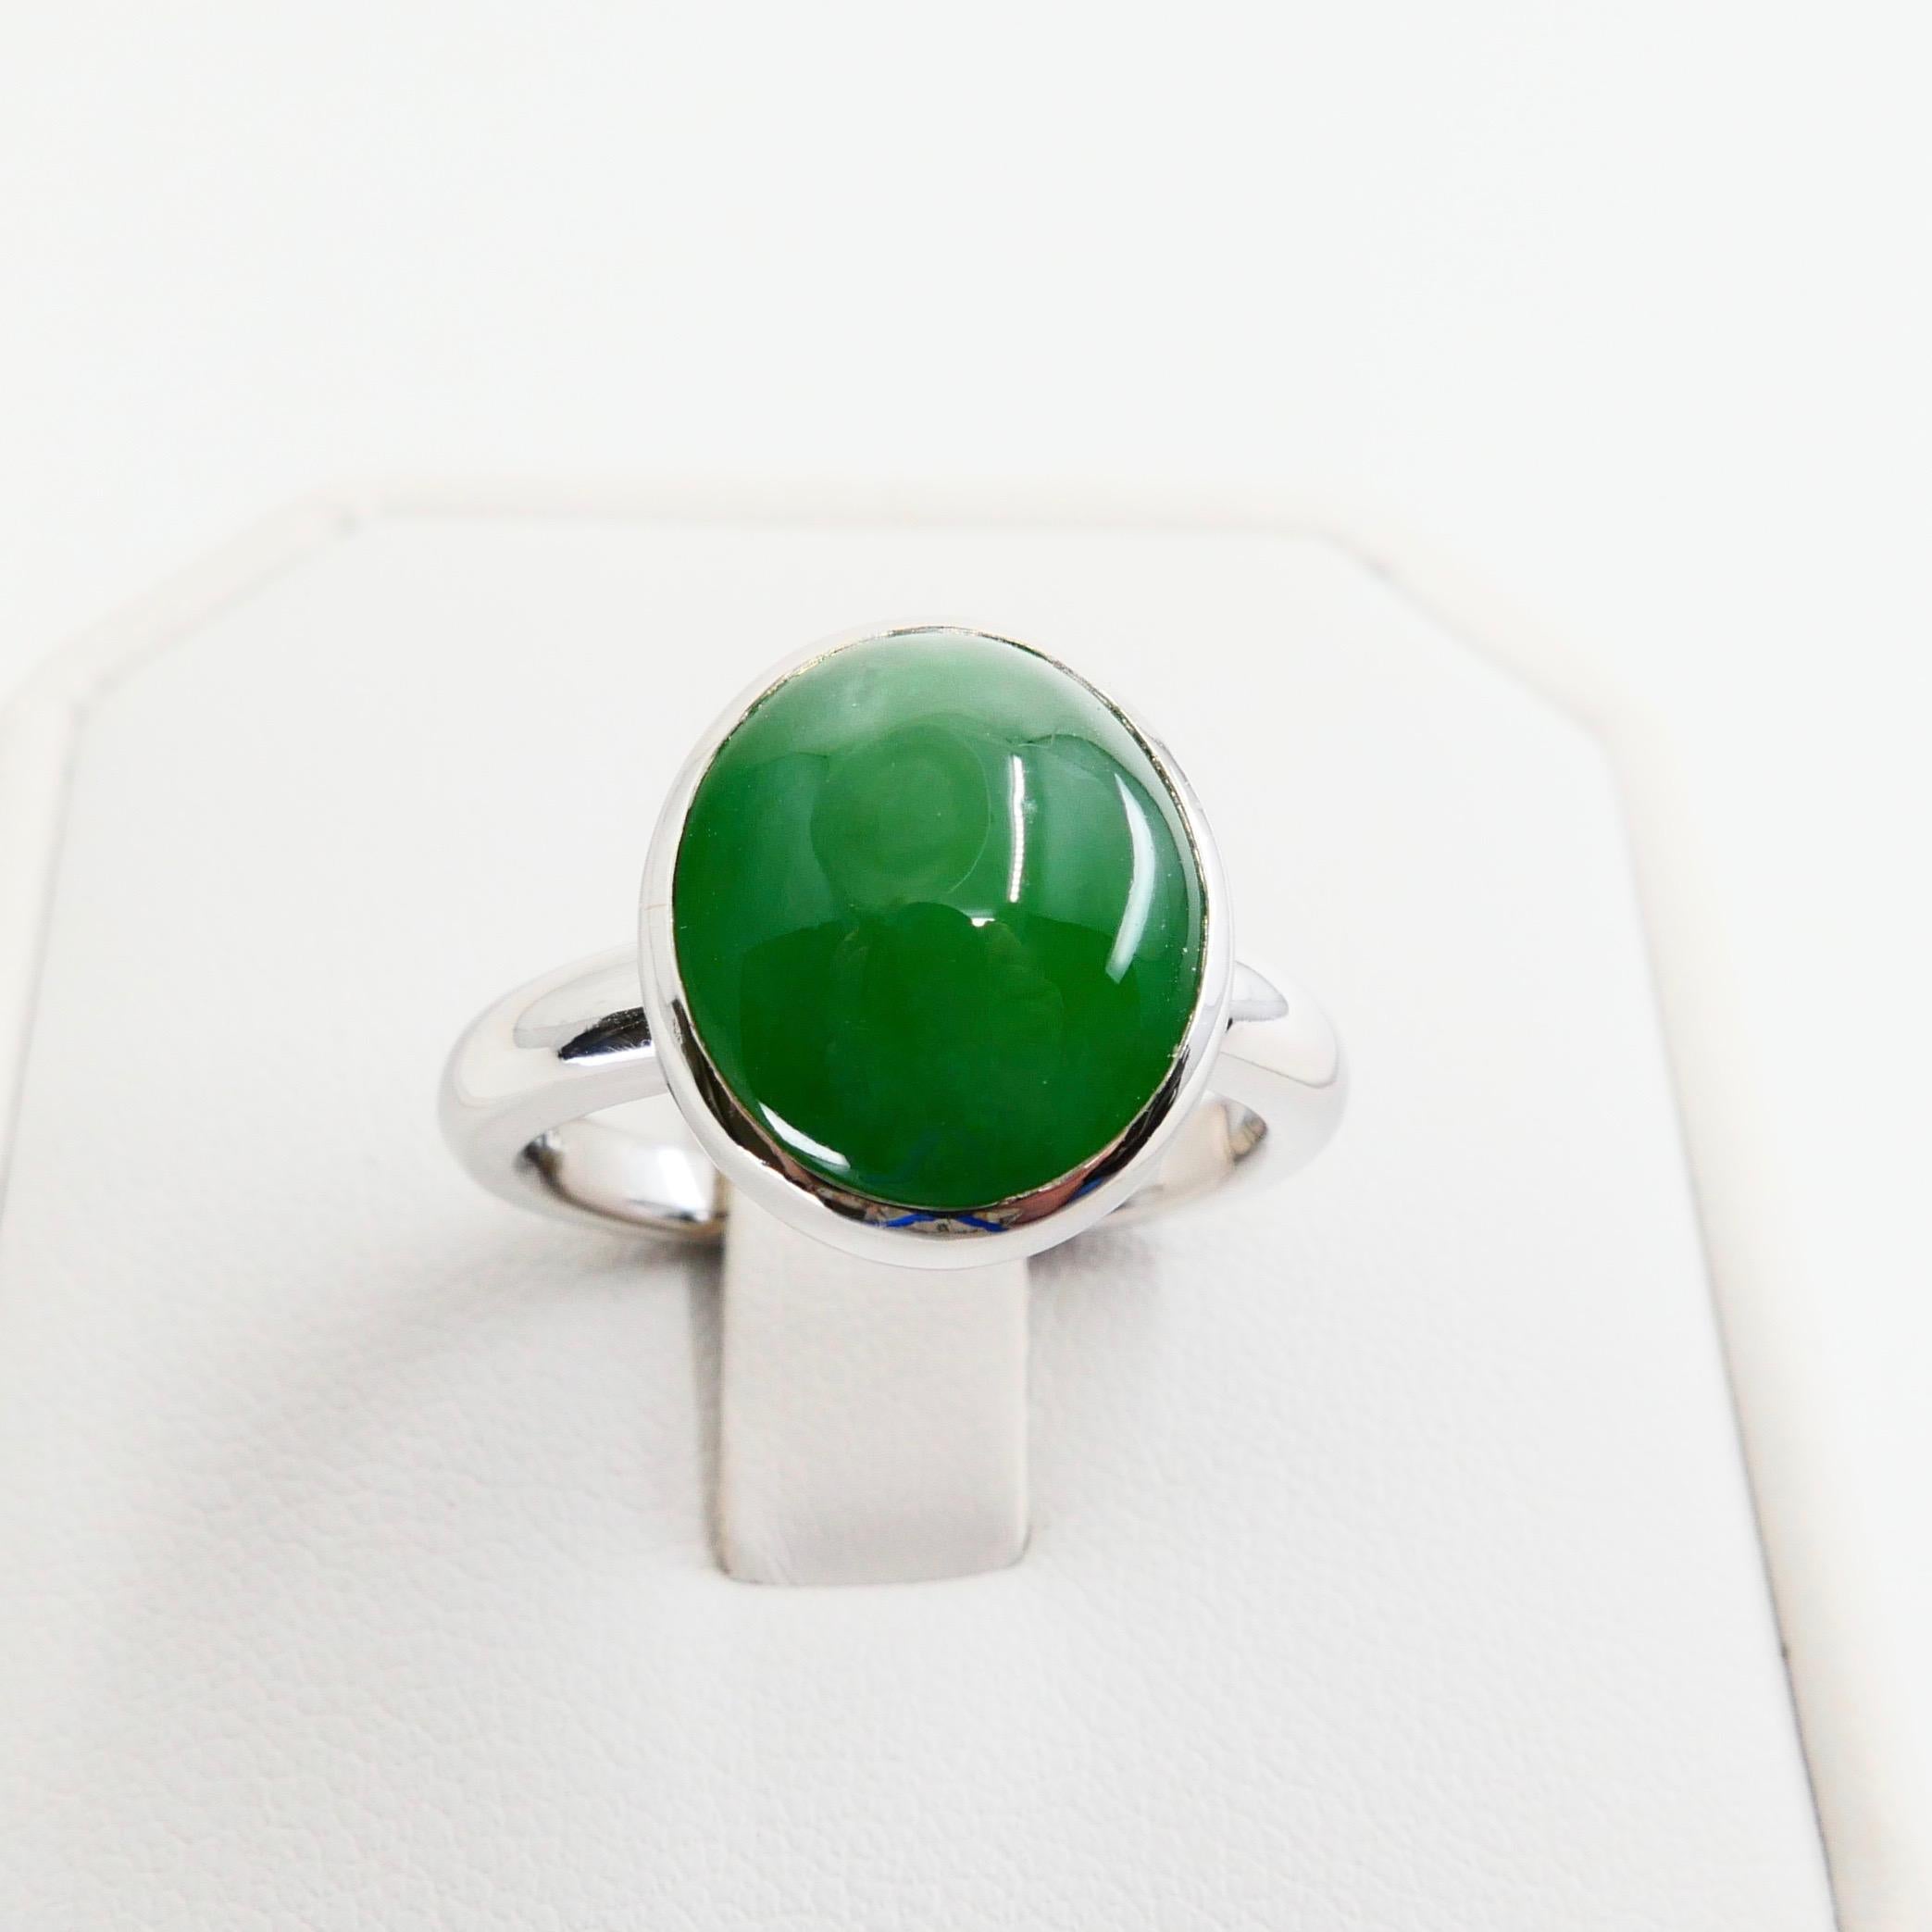 Certified Natural Type A Jadeite Jade Ring, Apple Green Color, Unisex For Sale 7